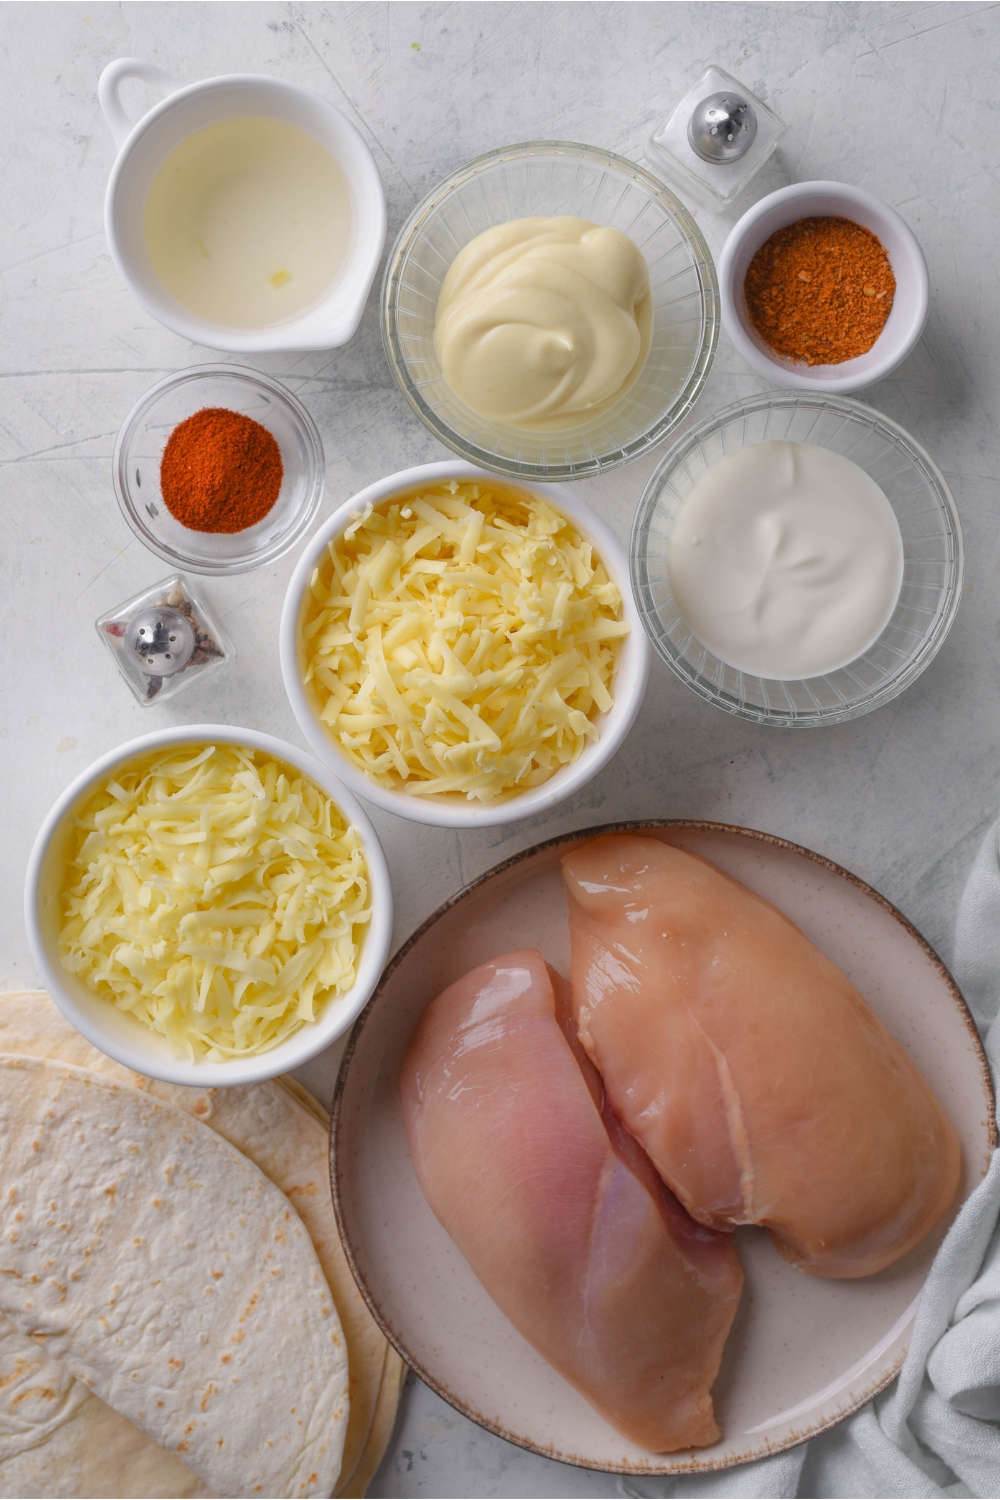 An assortment of ingredients including a plate of chicken breasts and bowls of mayonnaise, shredded cheese, spices, sour cream, and a pile of tortillas.